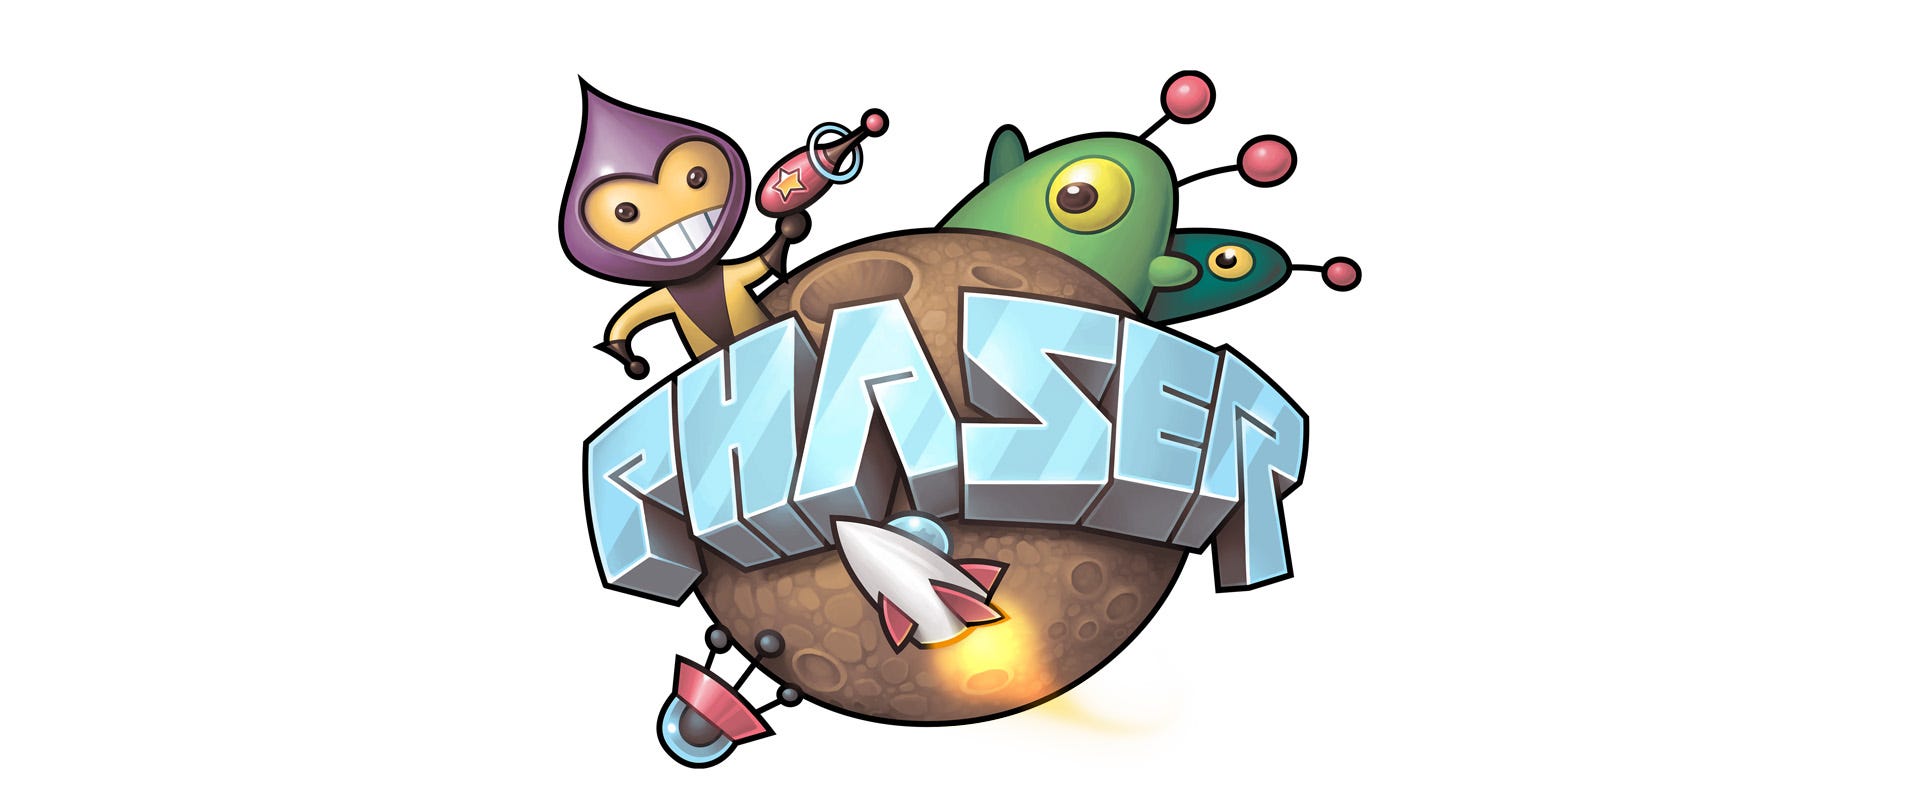 Phaser.js: A Step-by-Step Tutorial On Making A Phaser 3 Game